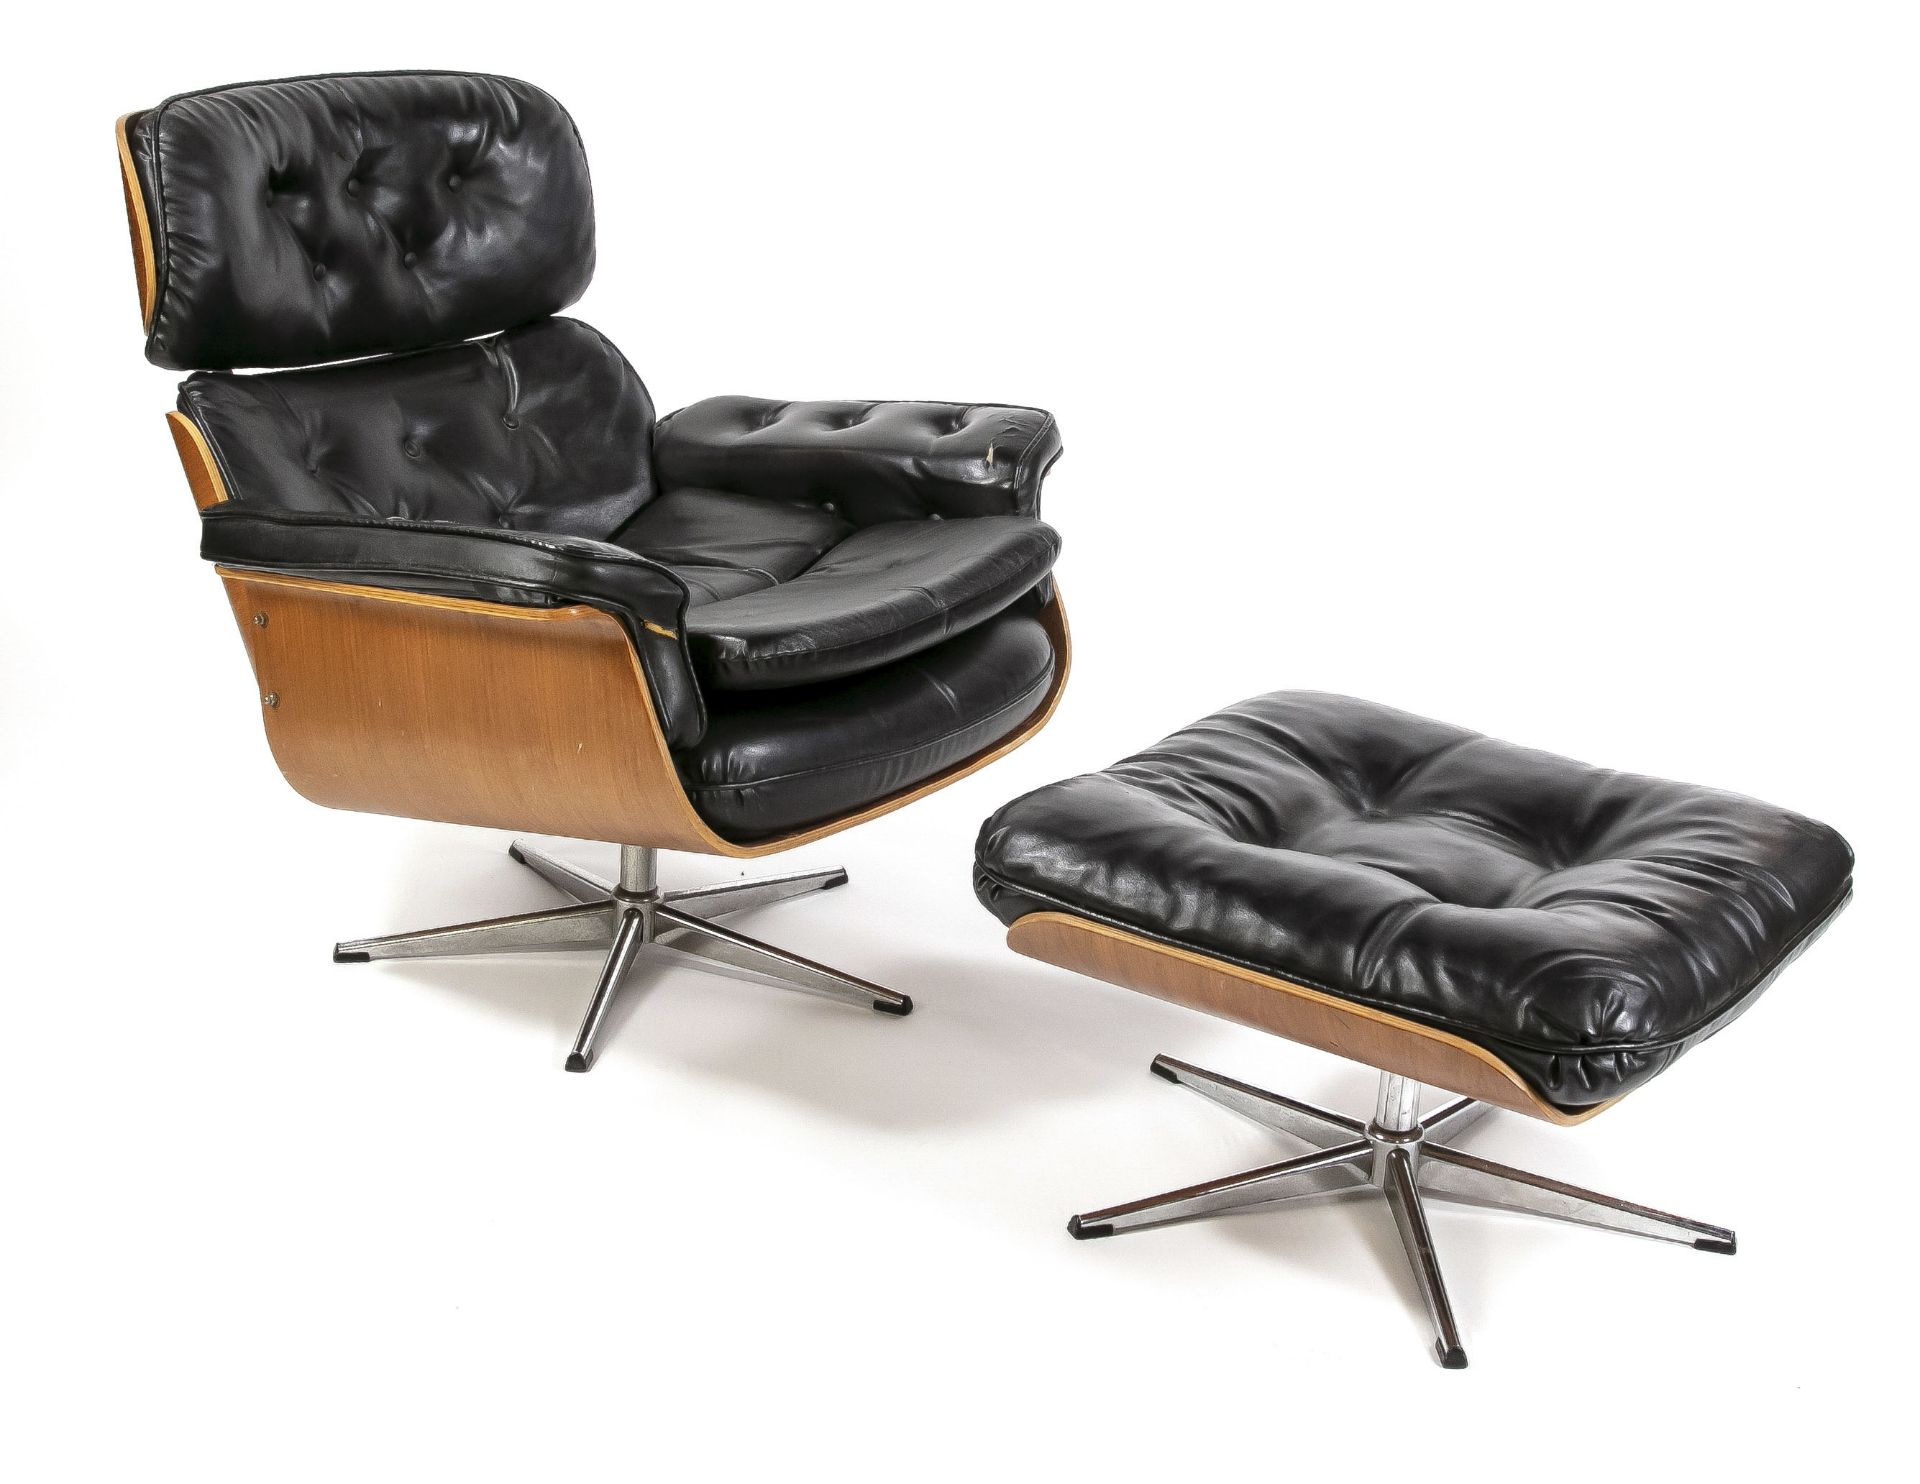 Lounge chair with stool in the style of Charles Eames, 20th c. Wood and black leather (partly